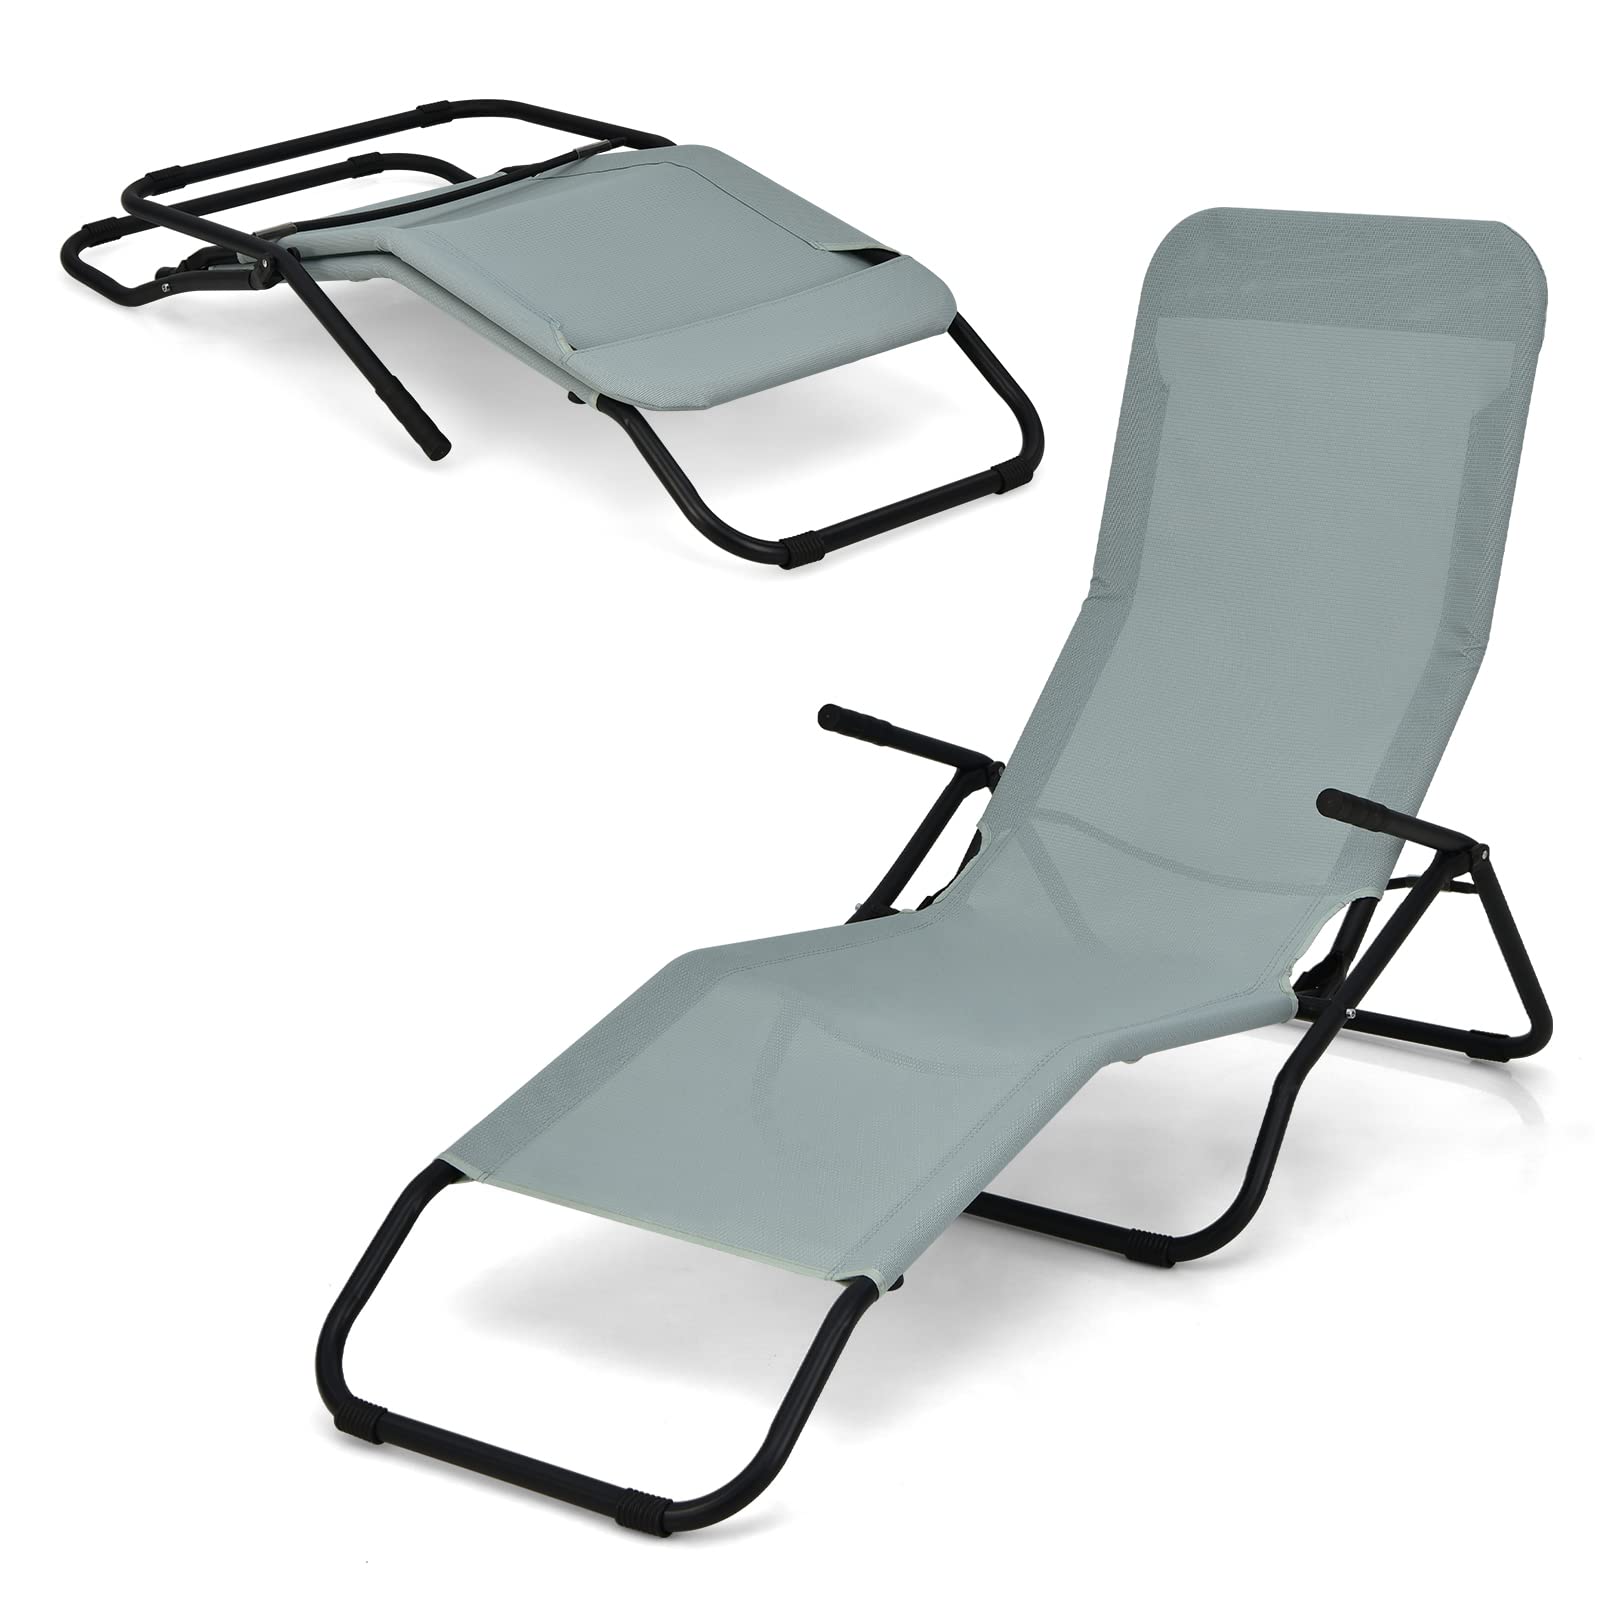 Lightweight and Portable Tanning Lounger for Deck (2, Green)